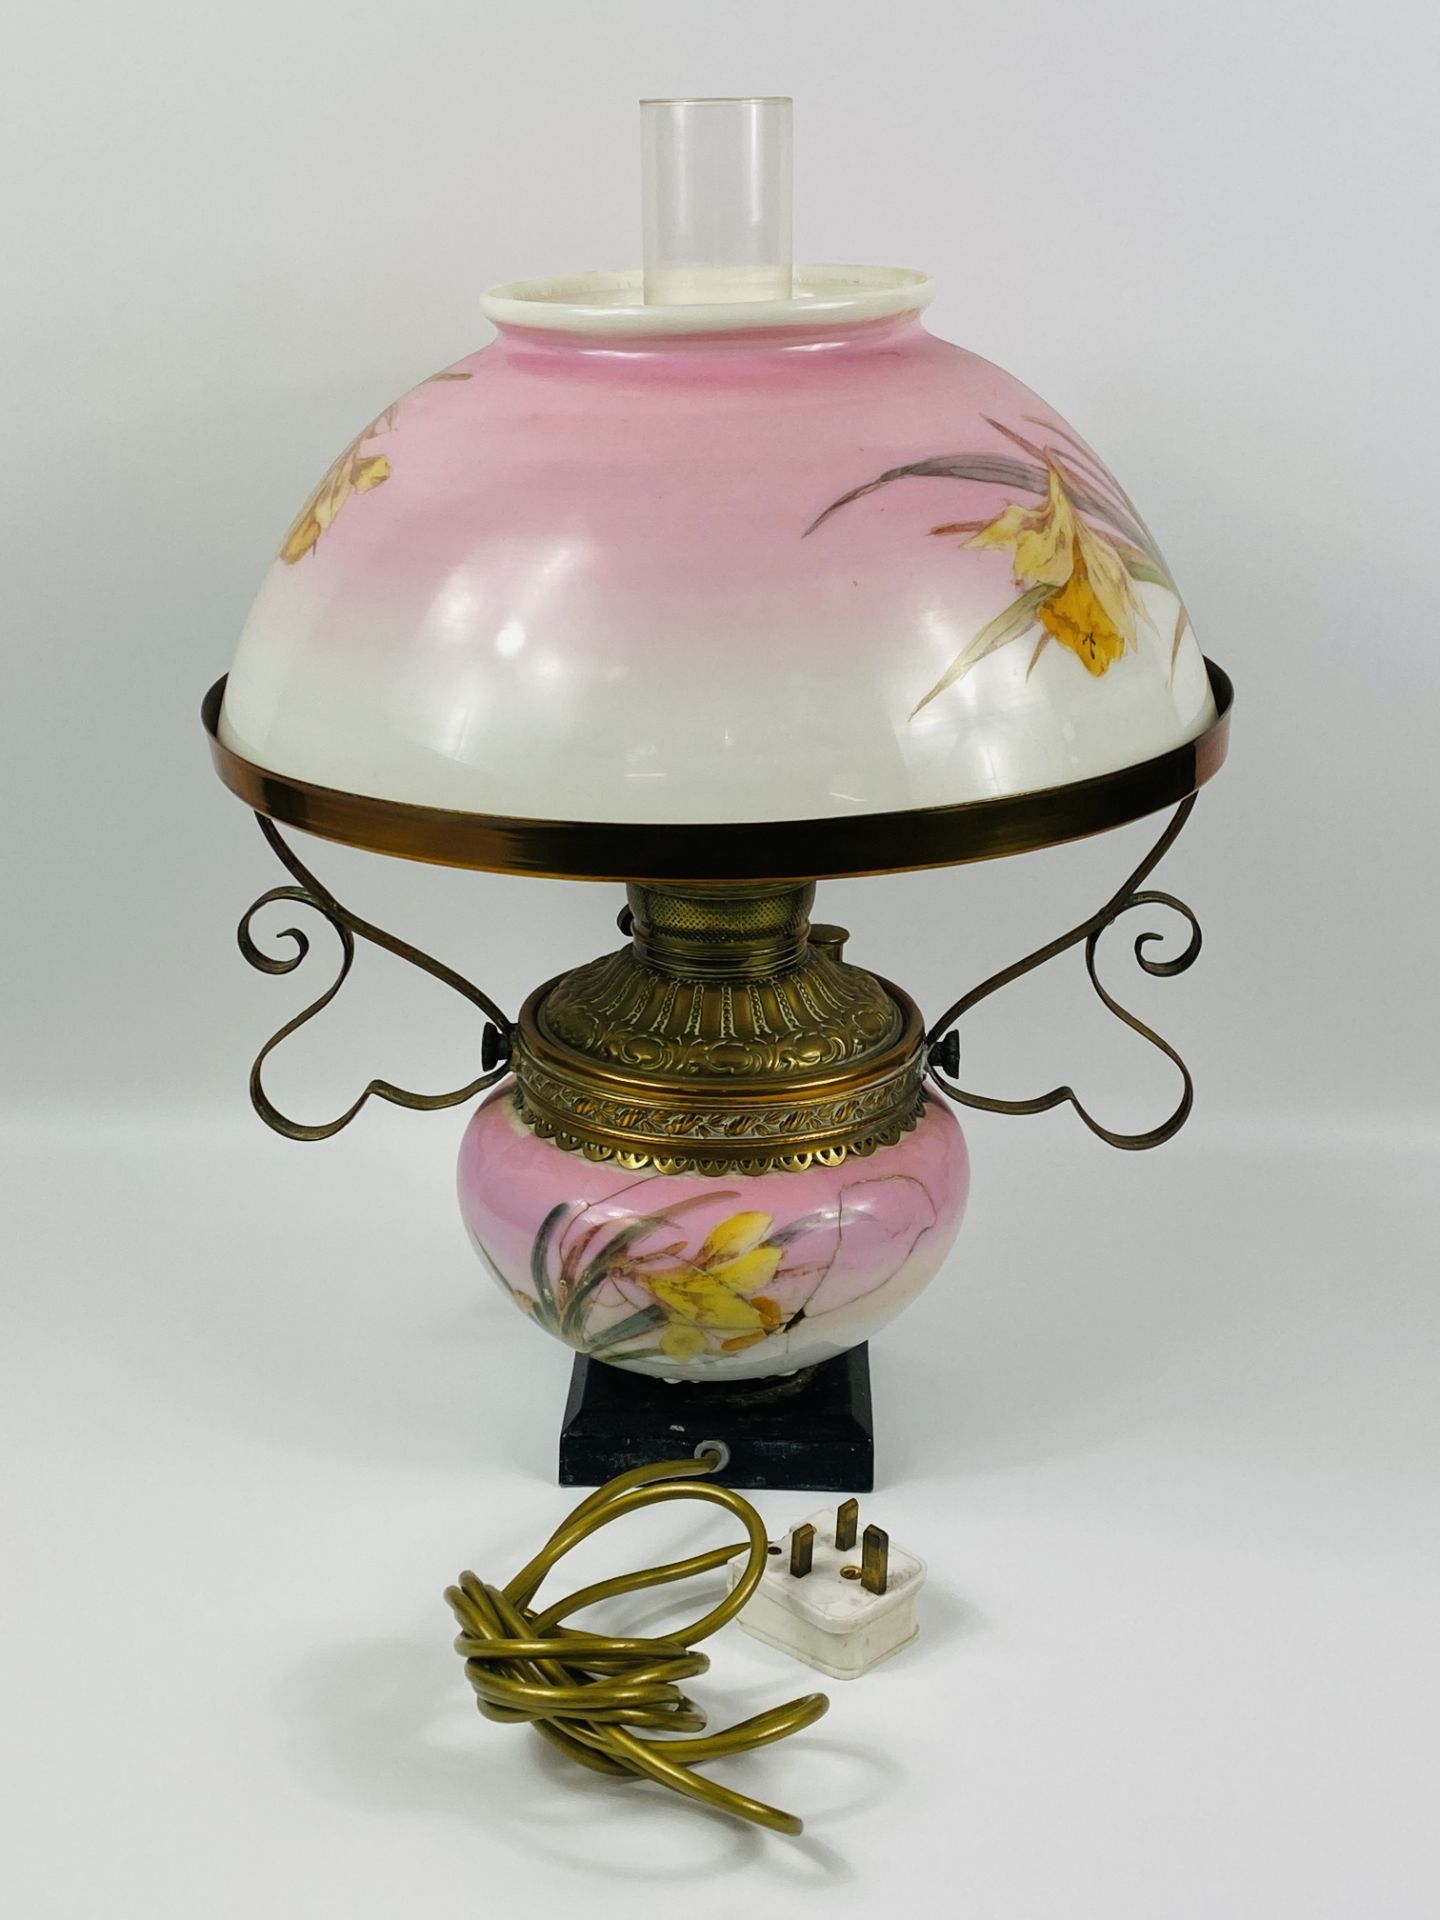 Victorian oil lamp later wired as a table lamp - Image 4 of 6